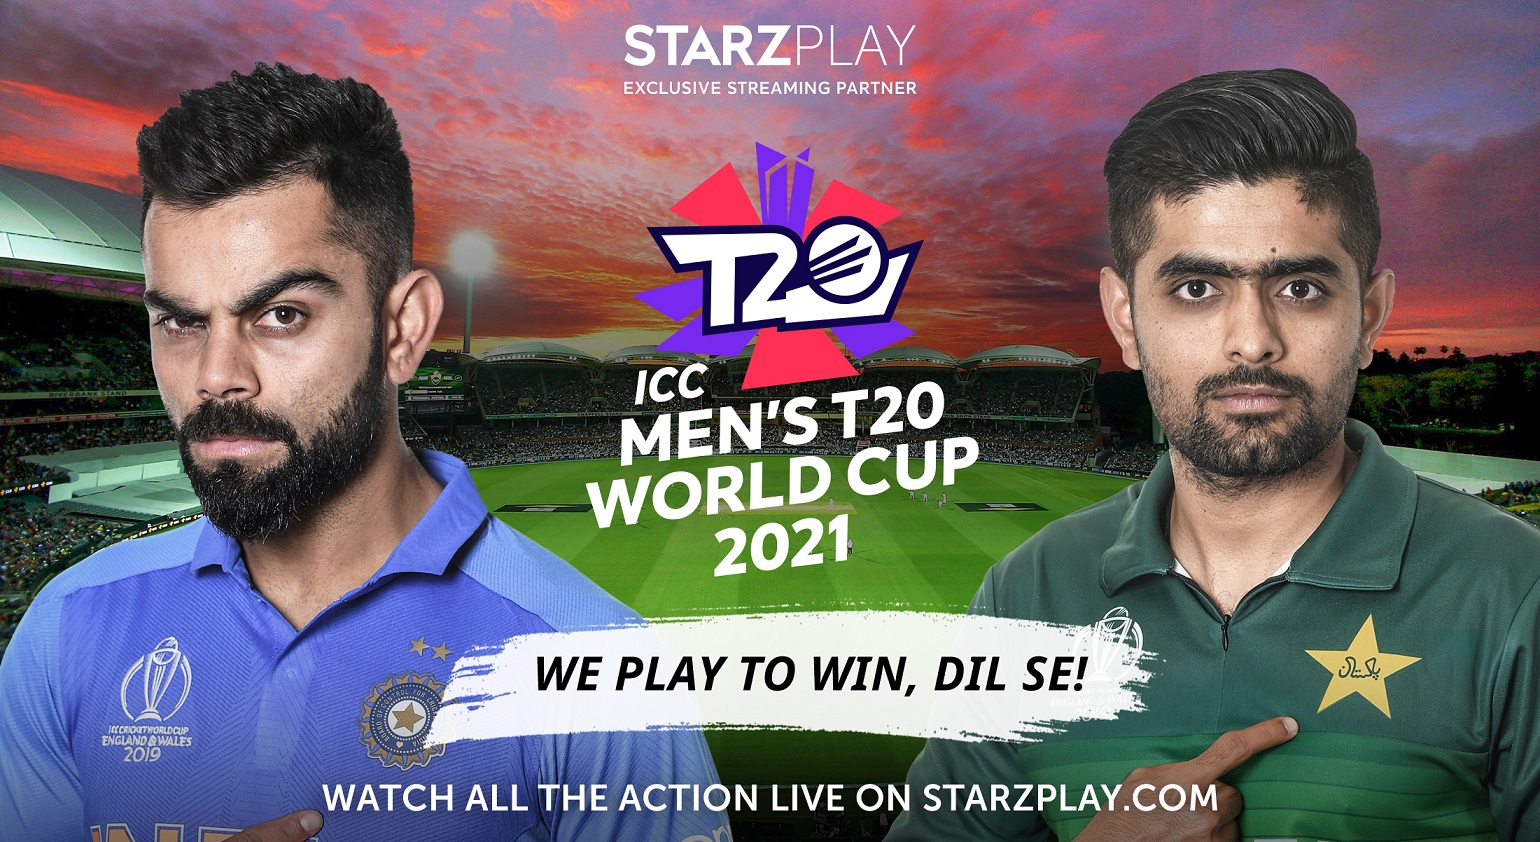 t20 world cup broadcast rights